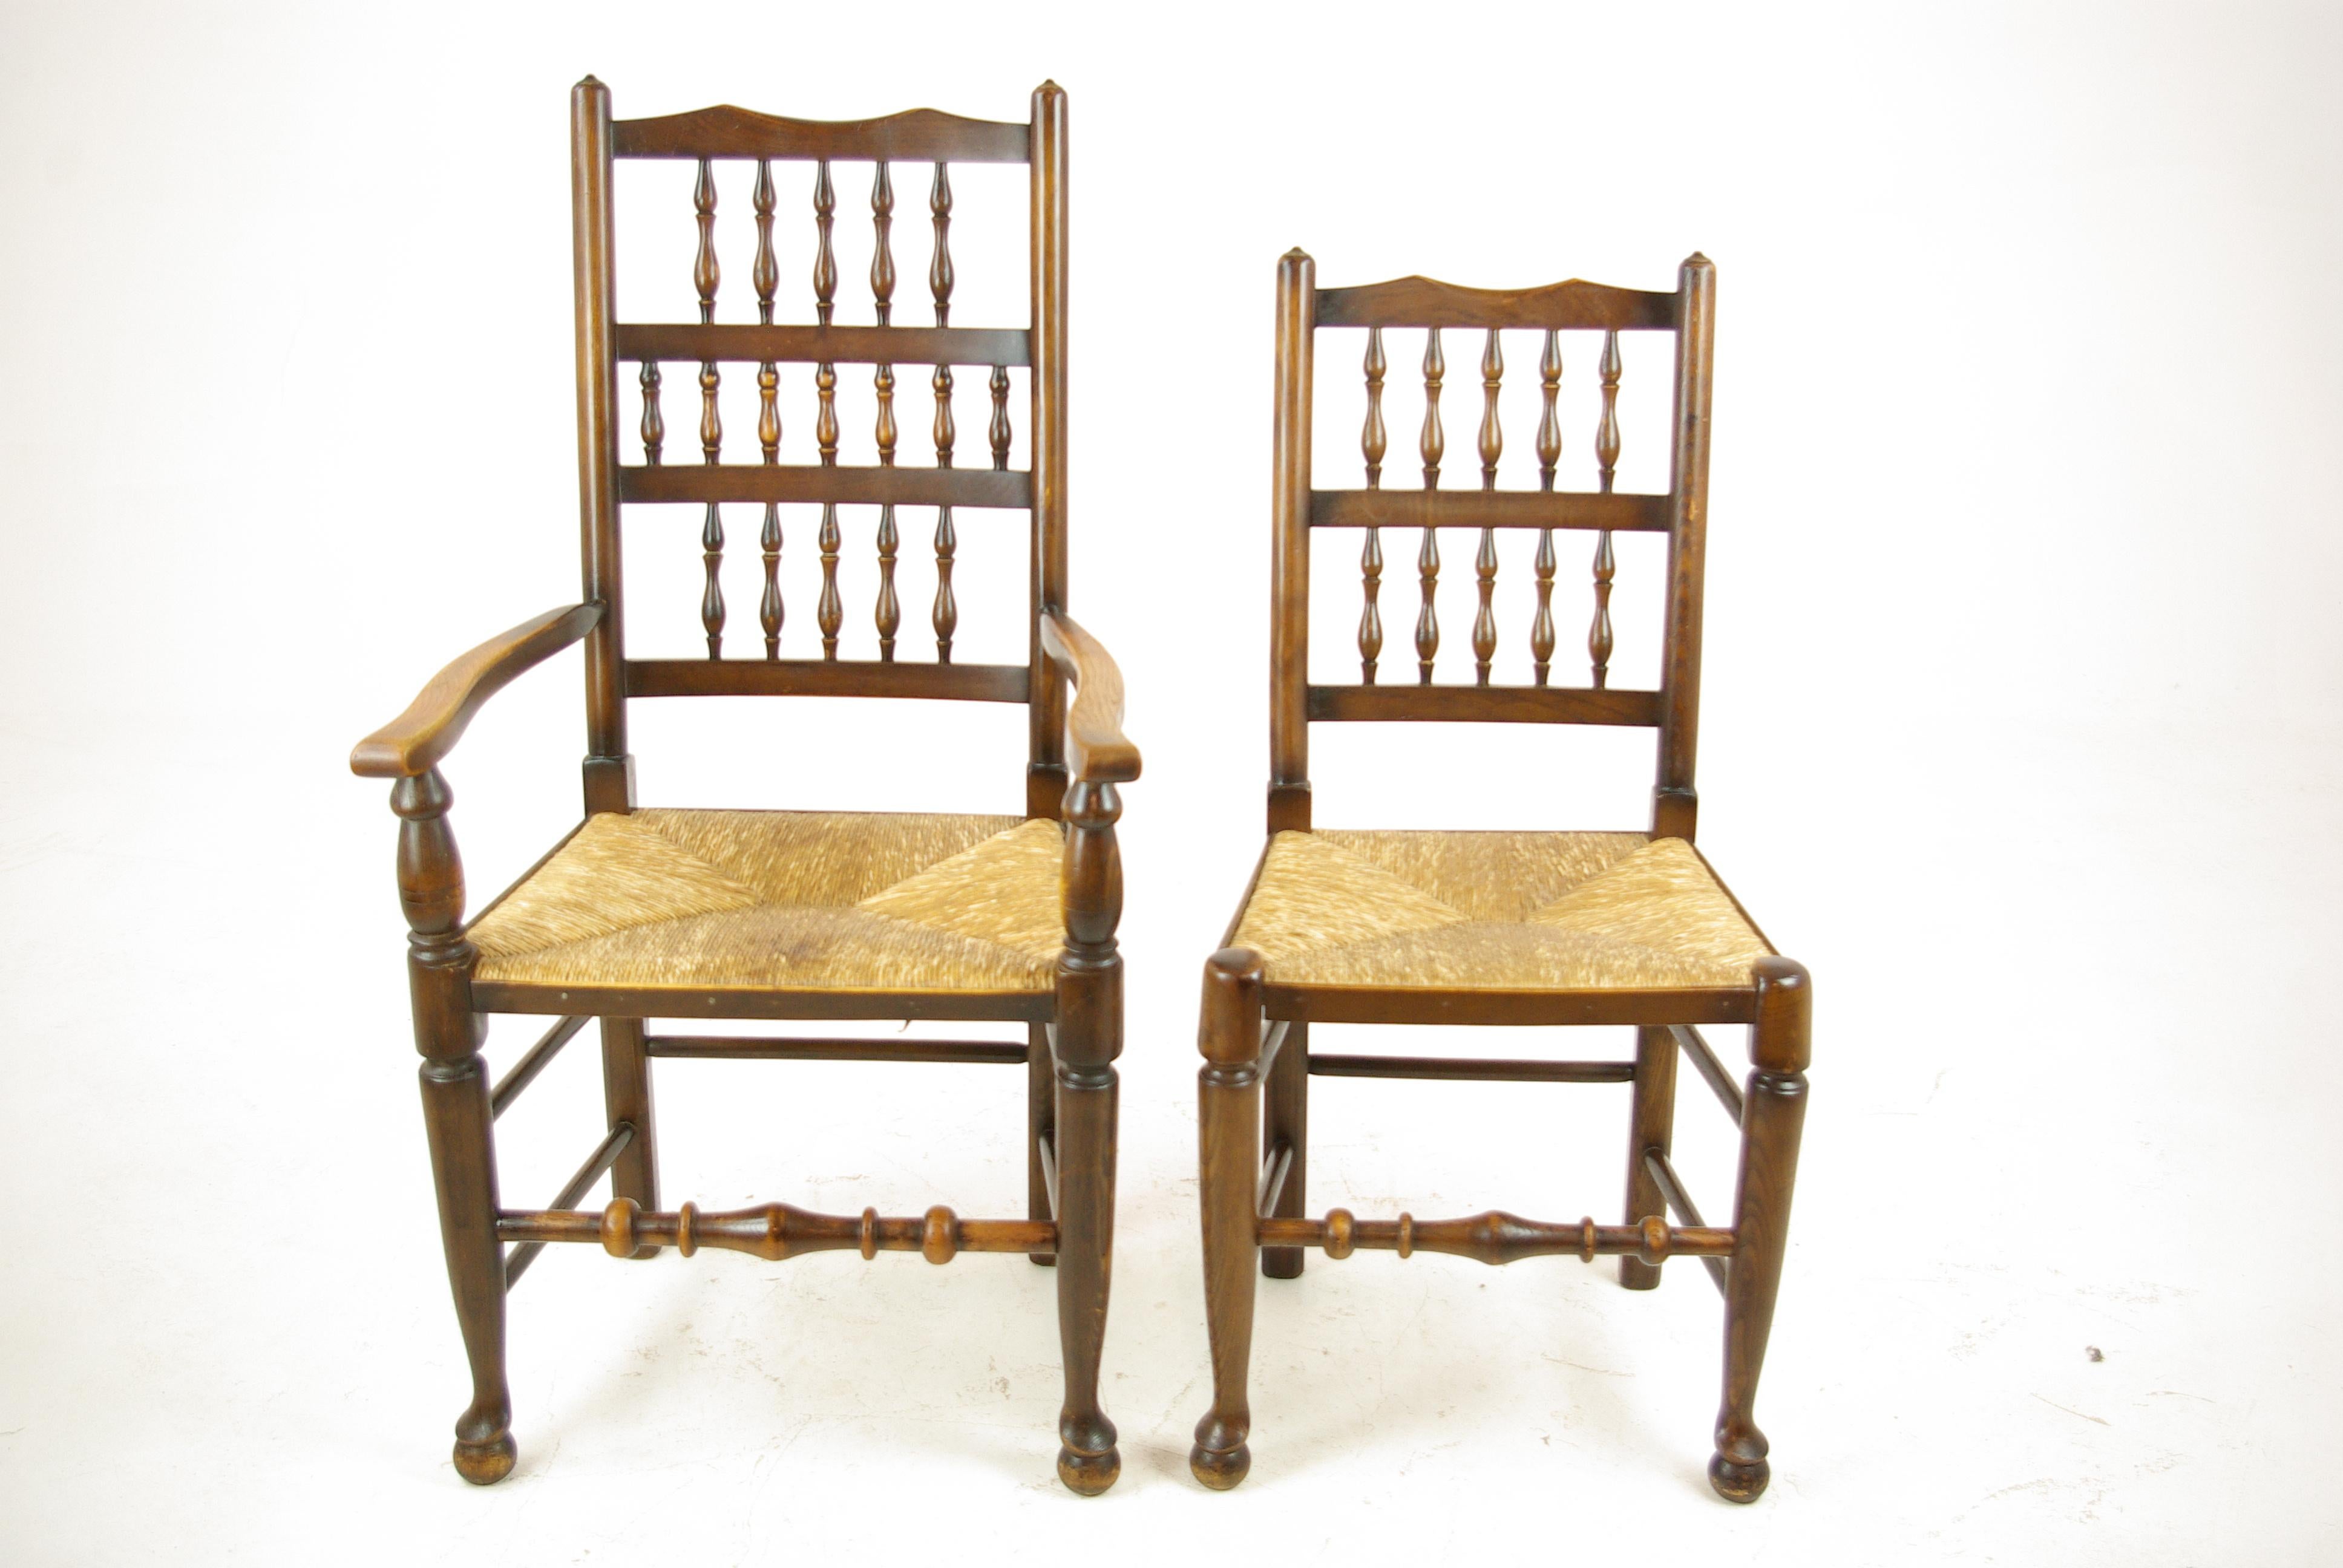 Antique Dining Chairs, Country Rush Chairs, 6+2 Chairs, Scotland 1900, B1252 5